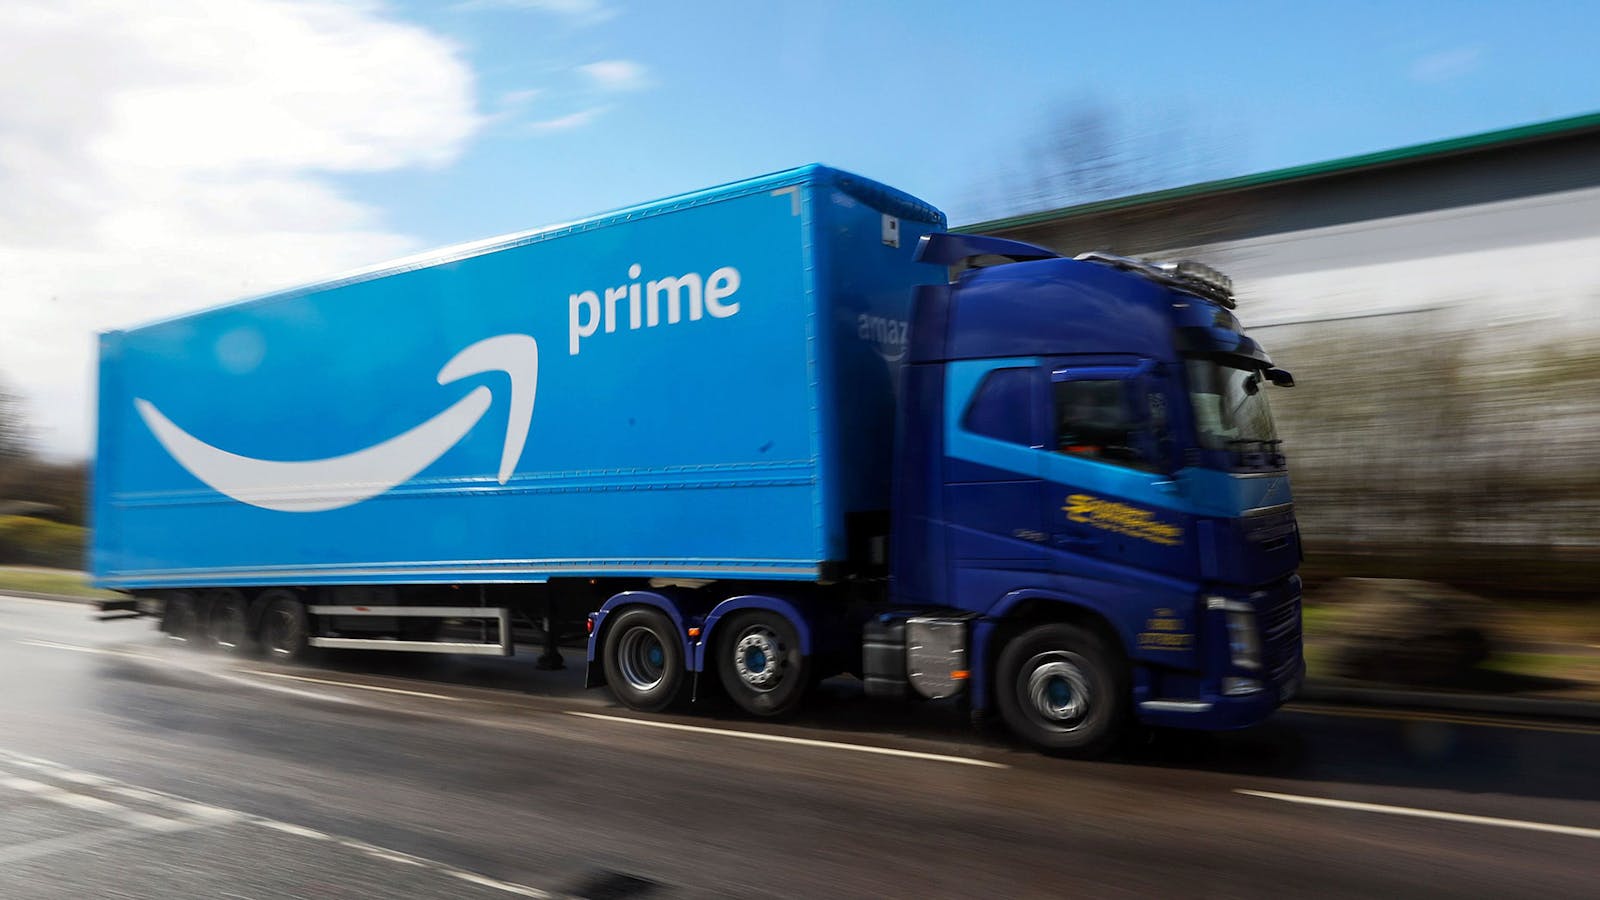 An Amazon Prime truck in the U.K. Photo by Bloomberg.